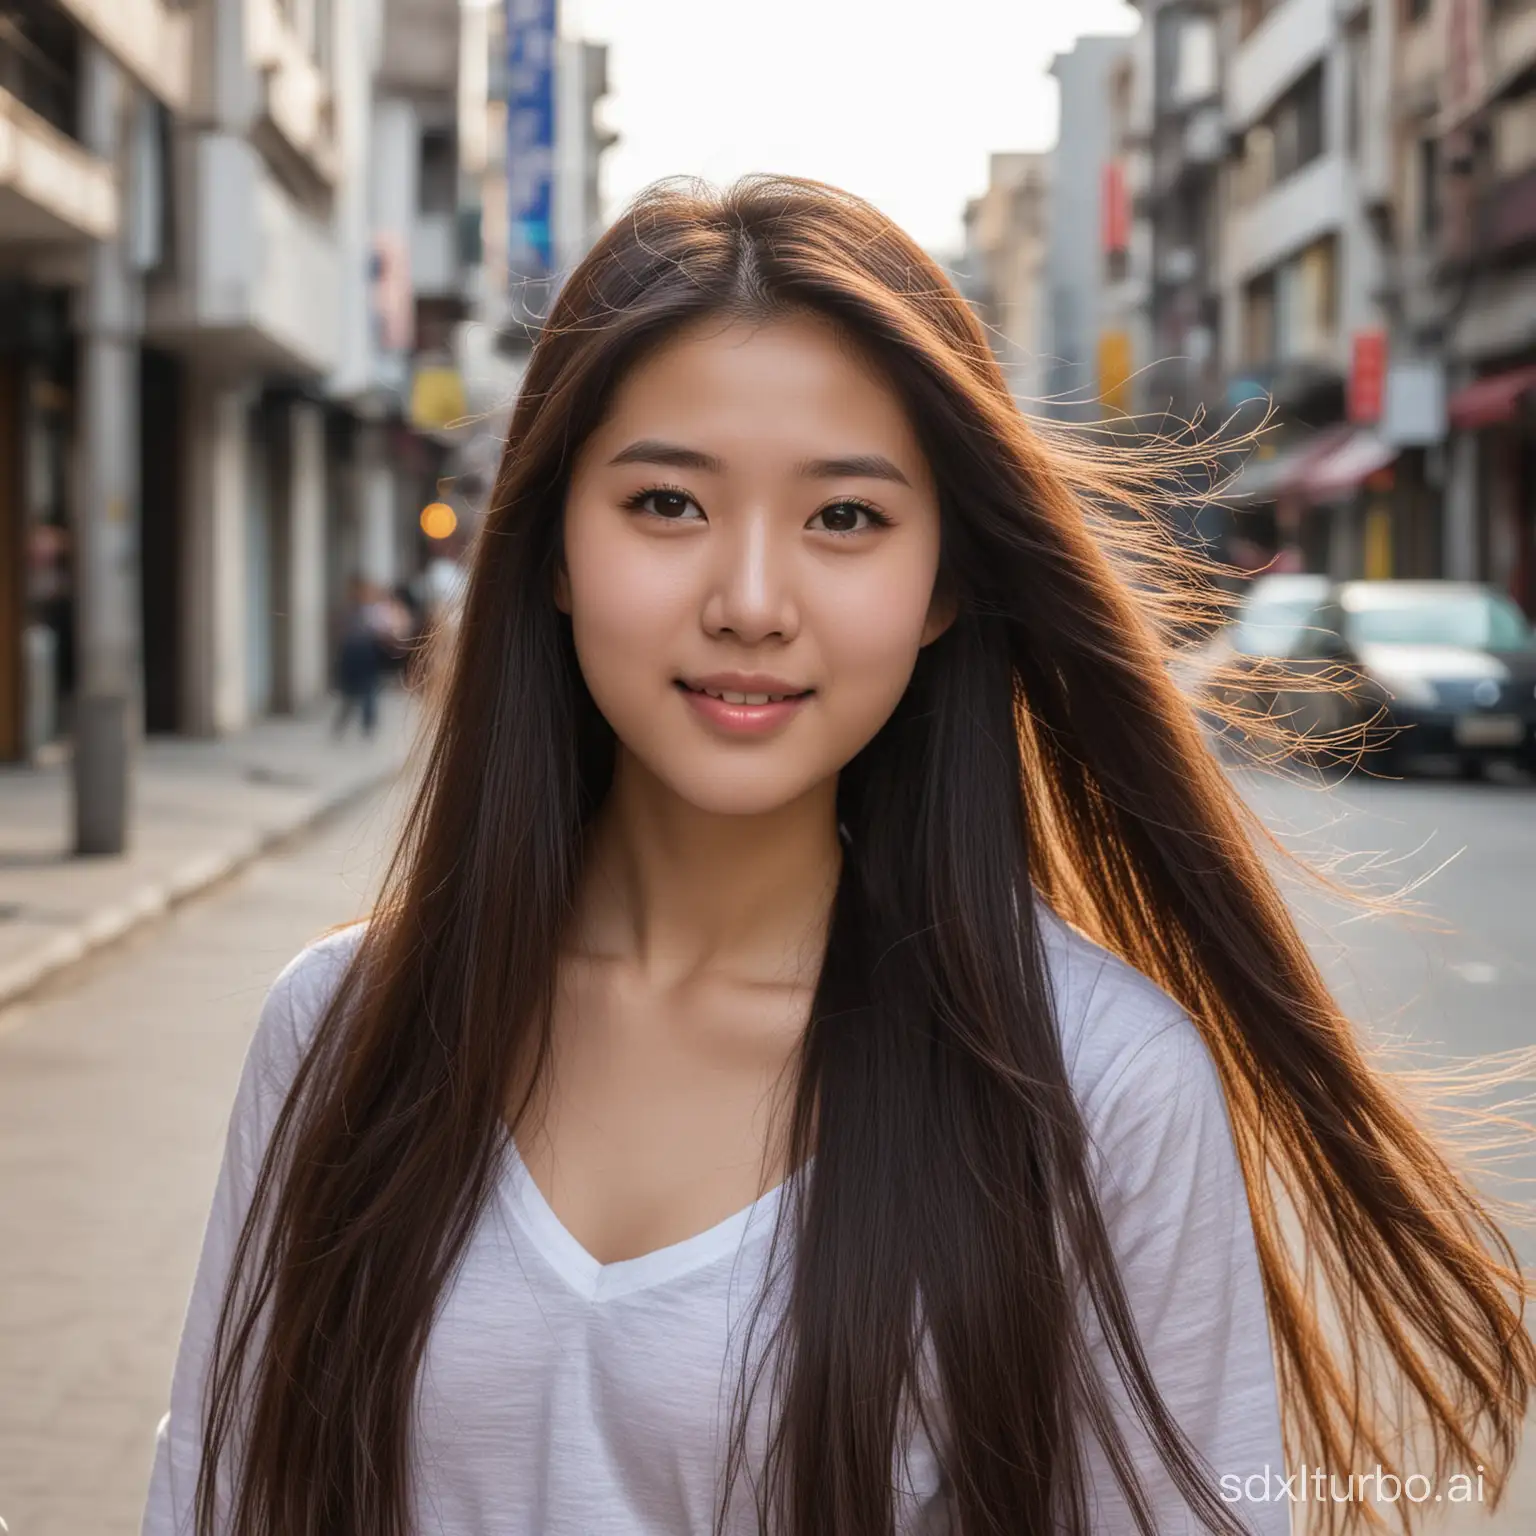 Plump-and-Beautiful-Chinese-Teenage-Girl-with-Long-Hair-Standing-on-Street